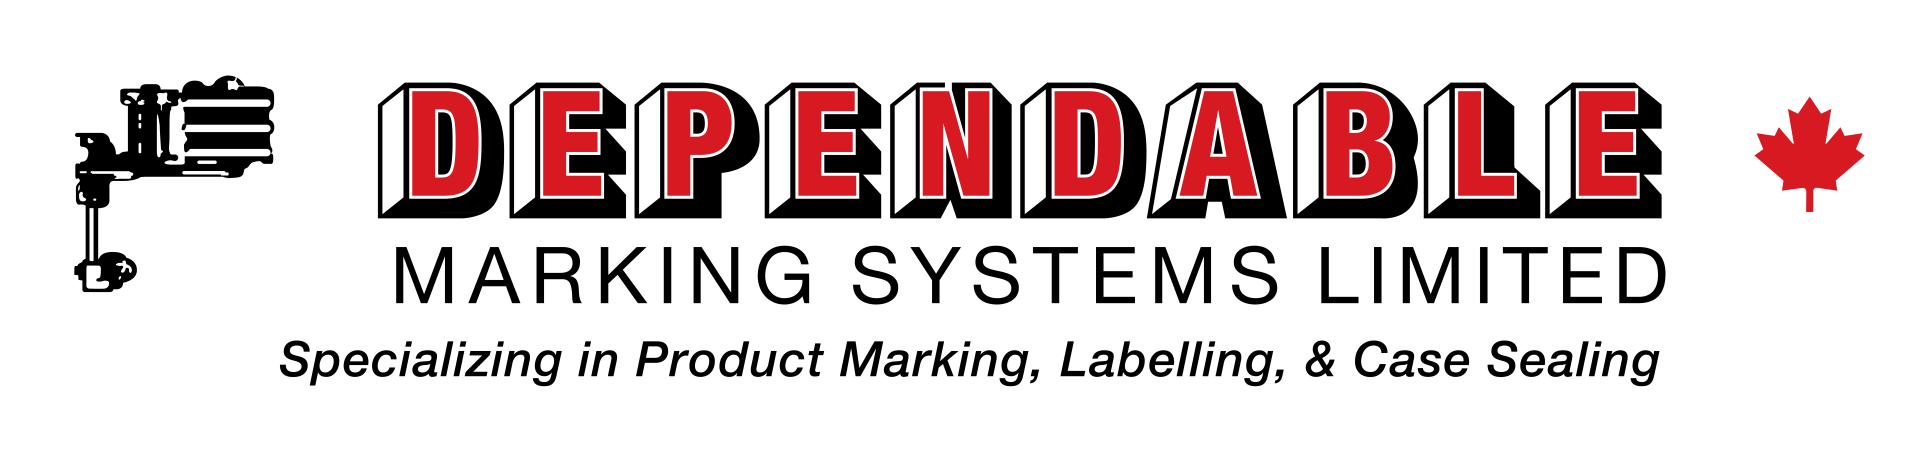 Dependable Marking Systems Limited Logo